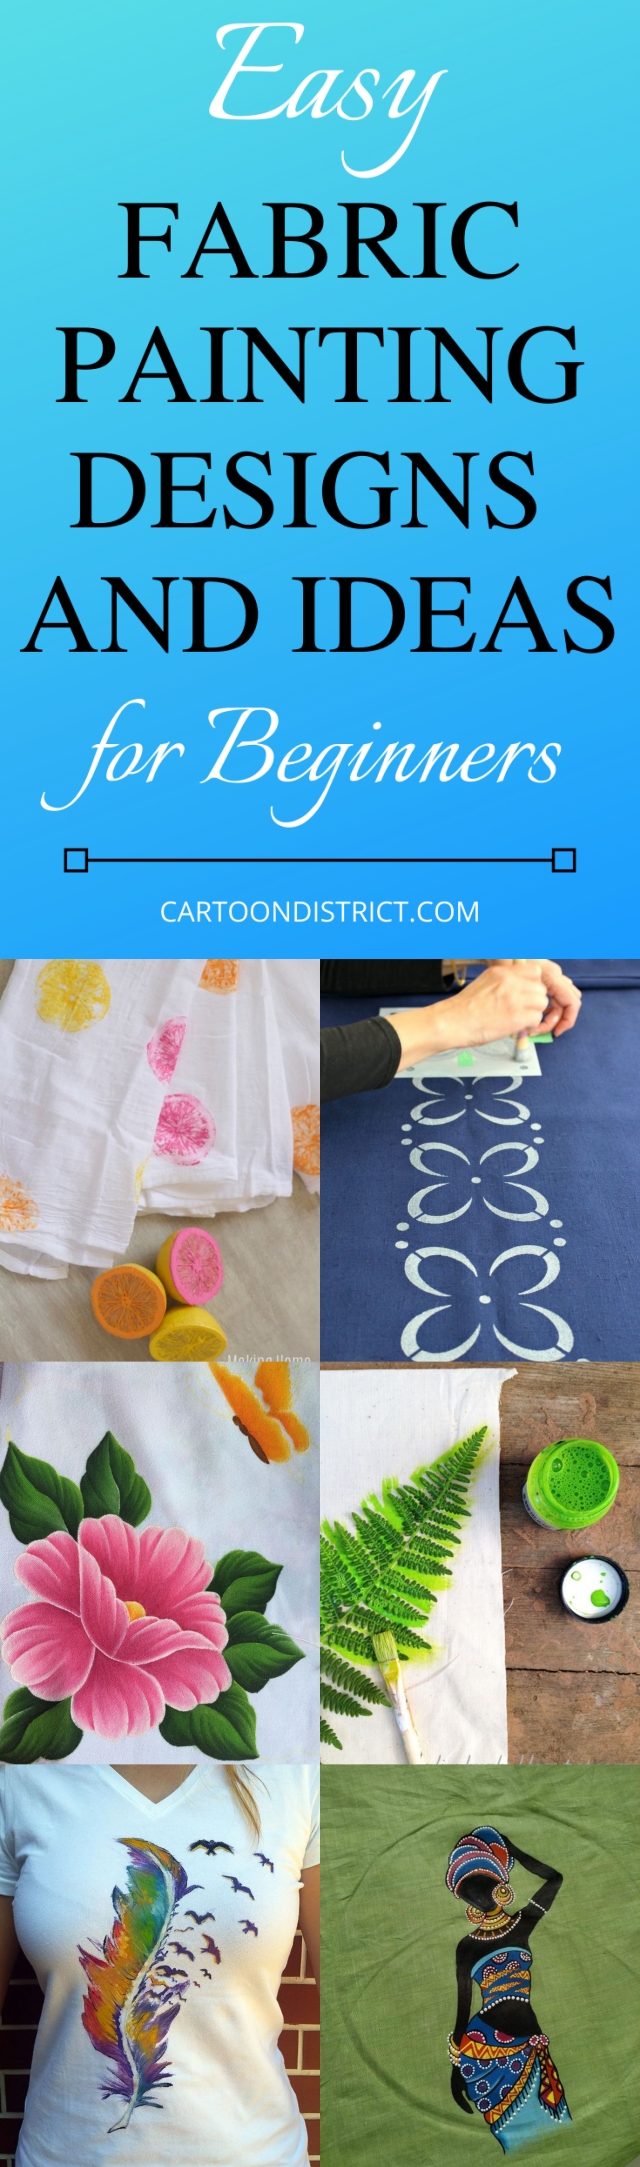 39 Easy Fabric Painting Designs and Ideas for Beginners - Cartoon ...